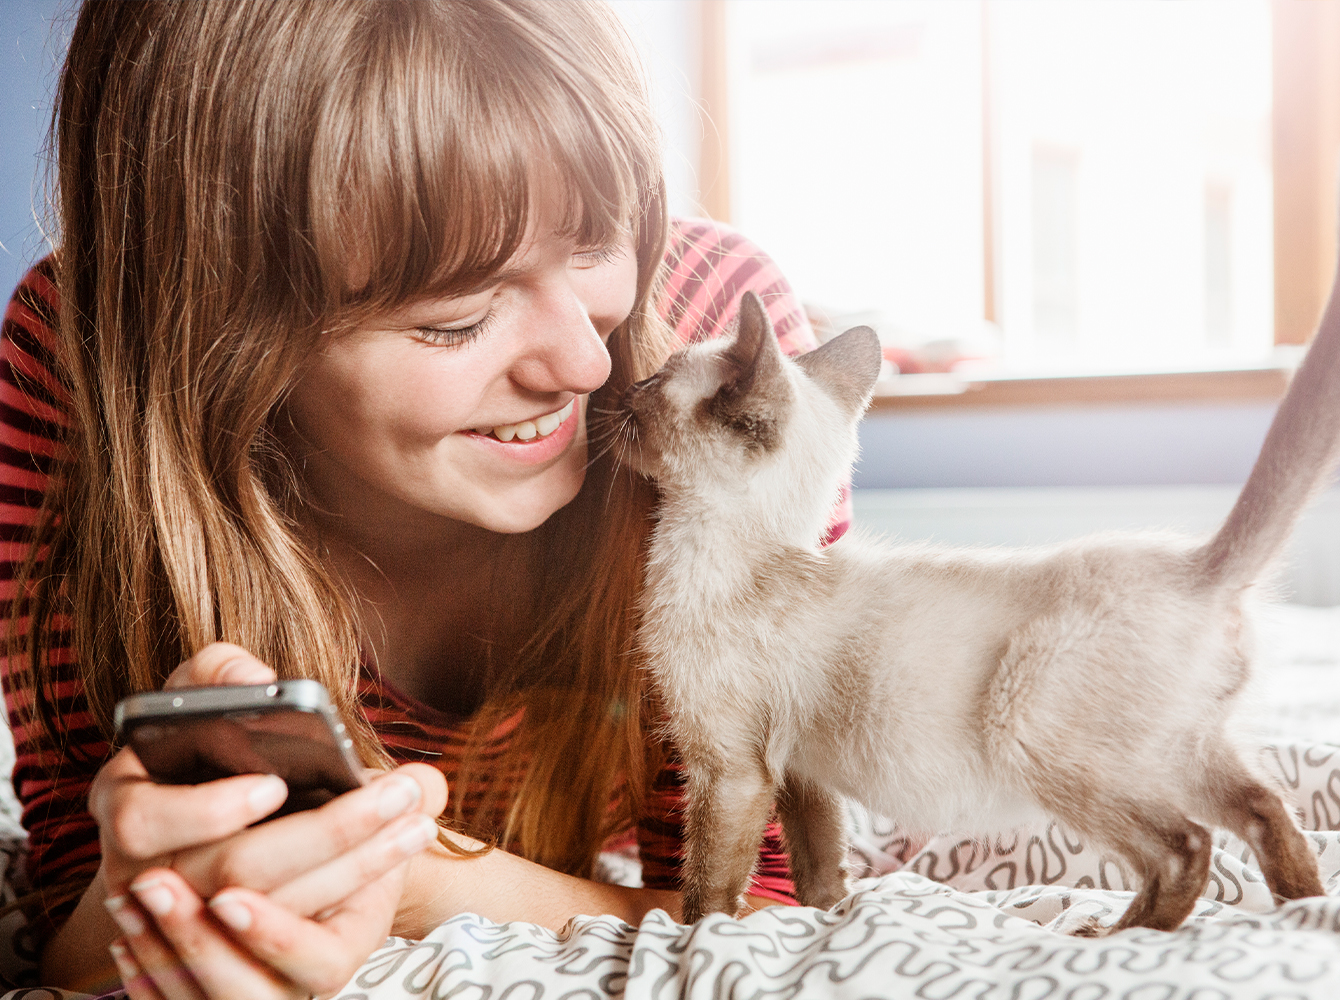 A young woman is laying on a bed with a phone in her hand while a kitten comes up to sniff her.